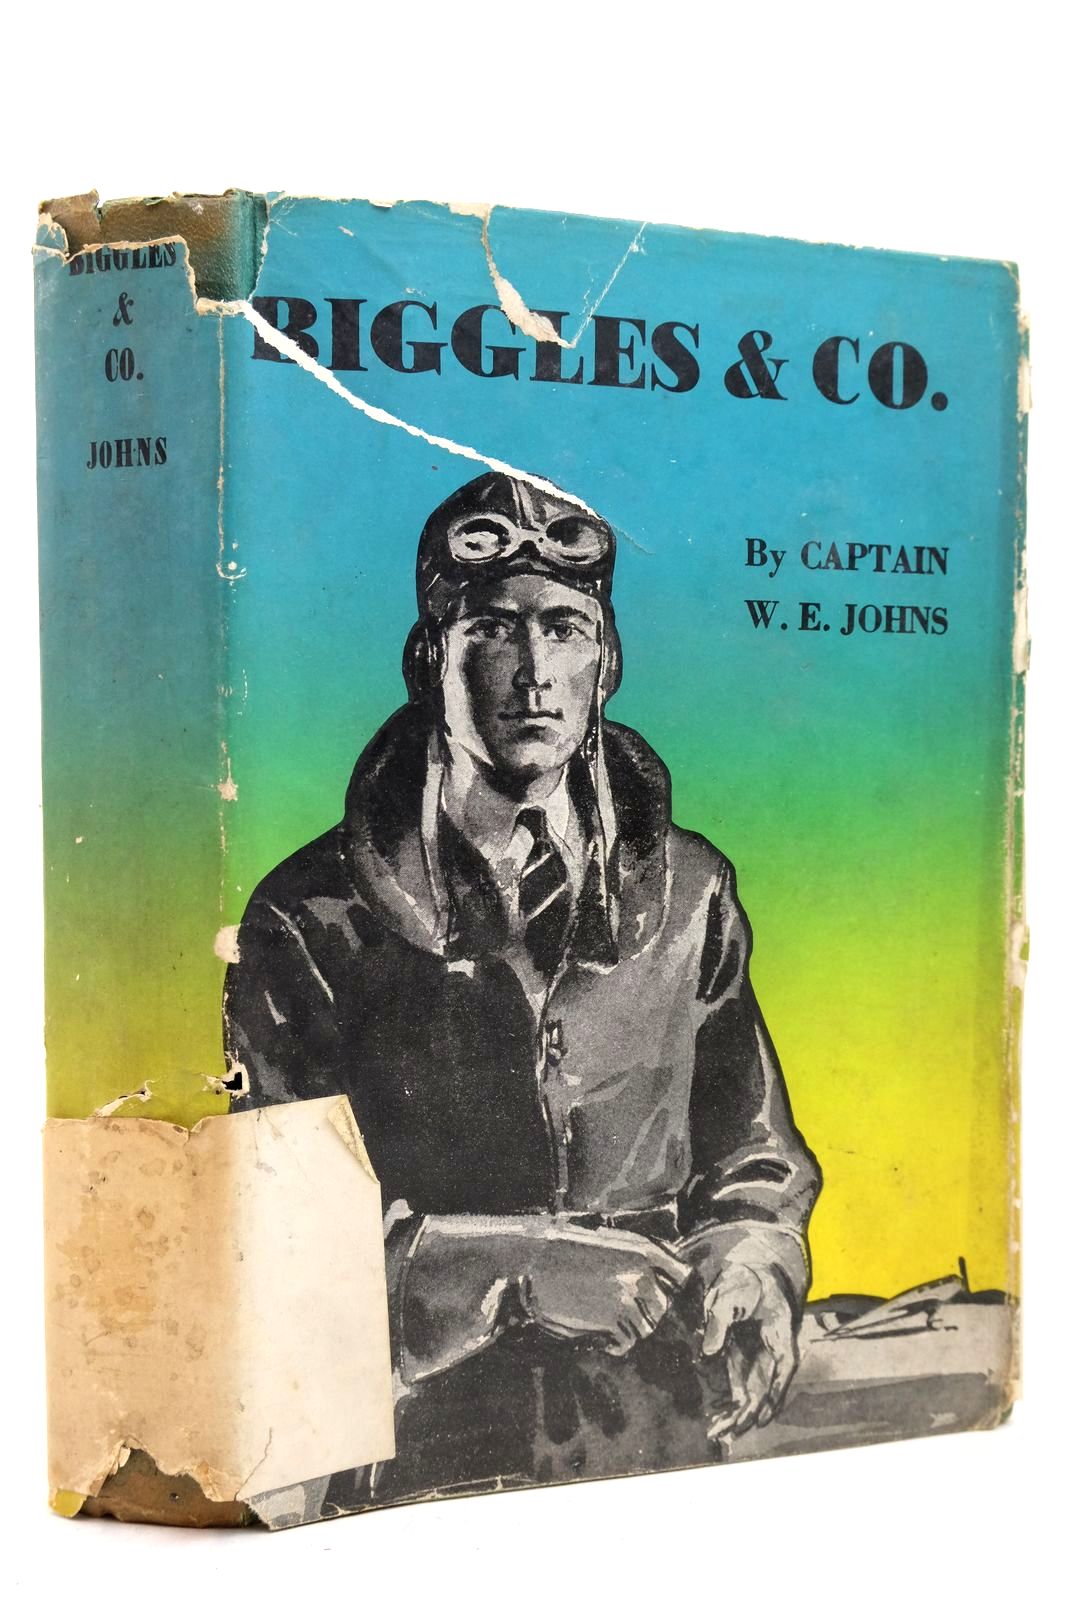 Photo of BIGGLES & CO.- Stock Number: 2139776